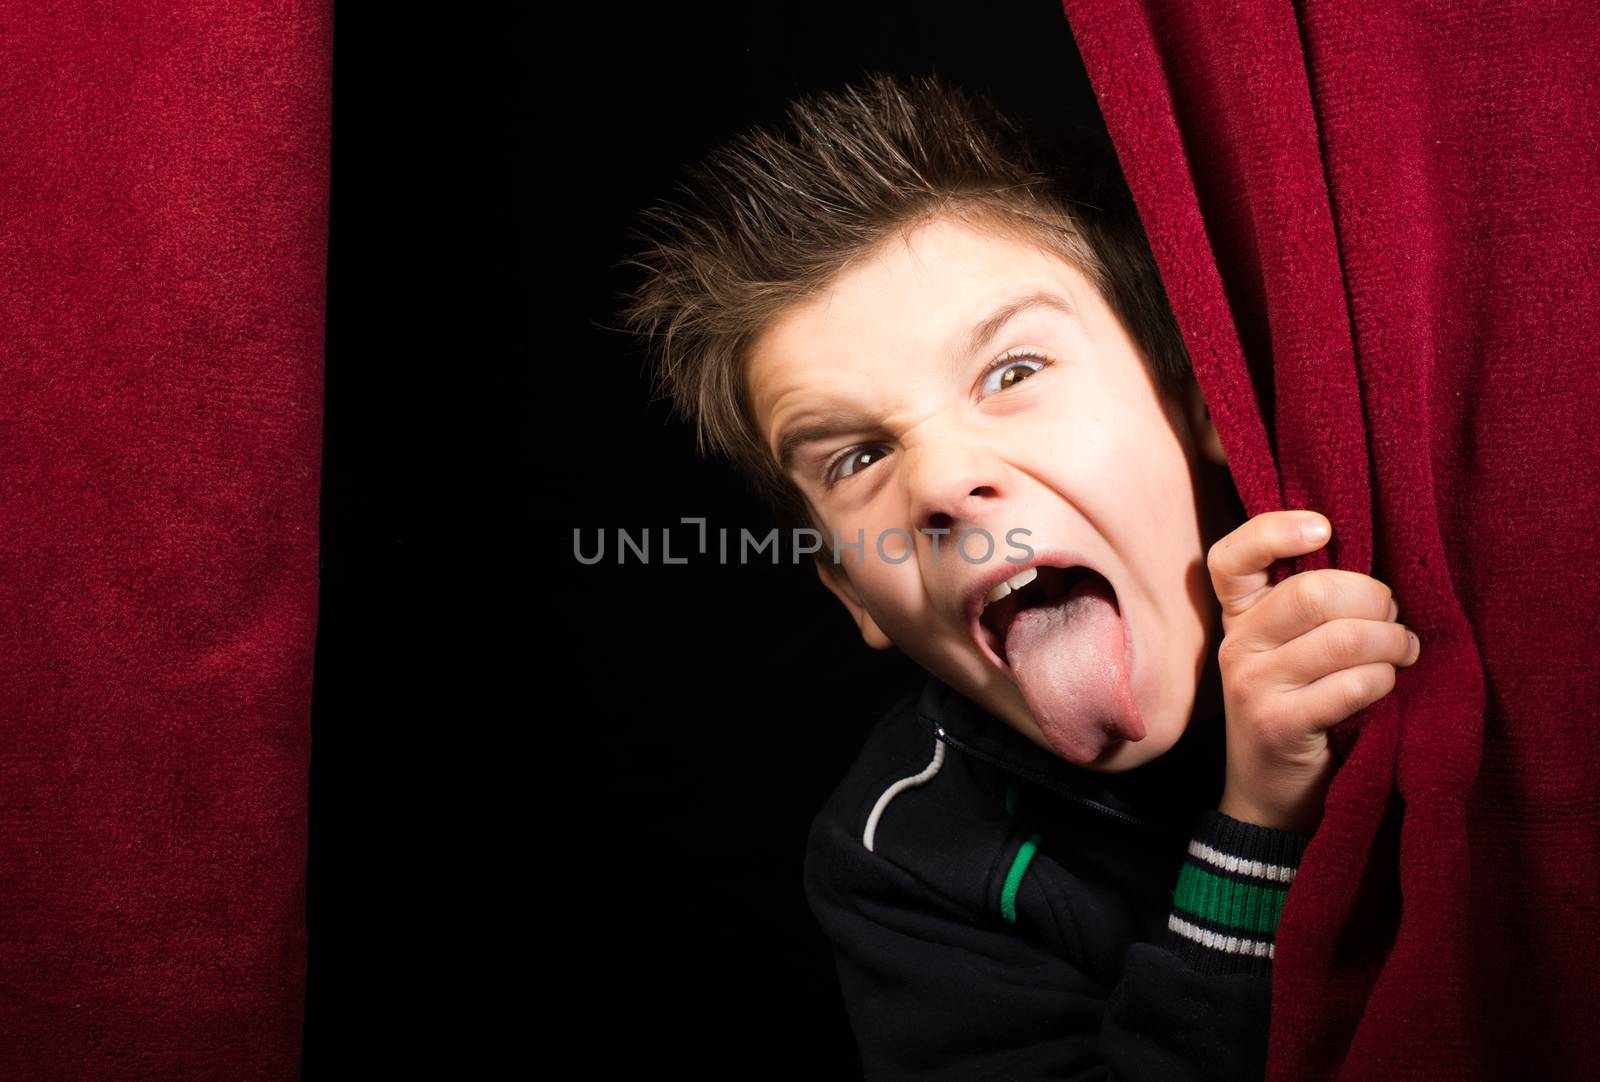 Child stick out his tongue.Appearing beneath the curtain